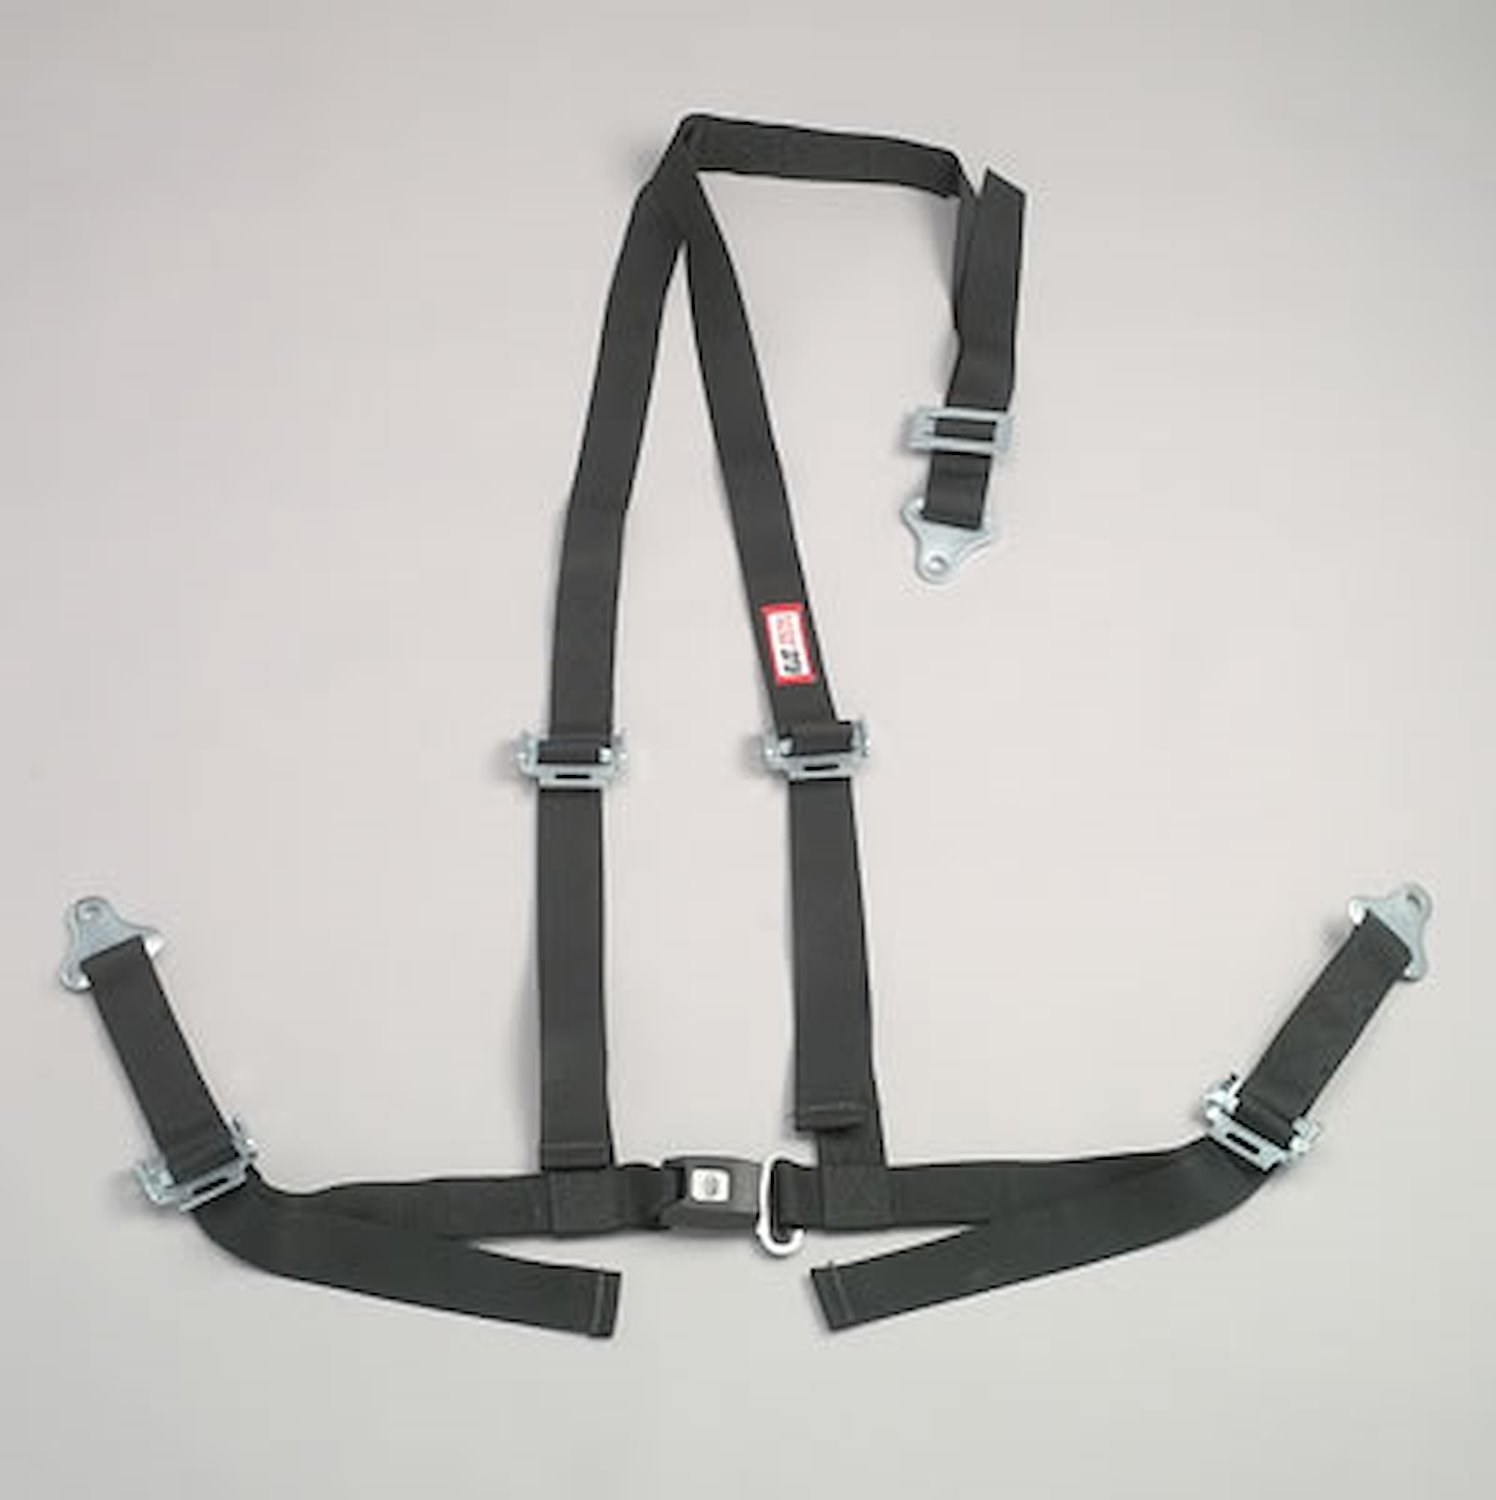 NON-SFI B&T HARNESS 2 PULL DOWN Lap Belt SNAP 2 S. H. Y FLOOR Mount WRAP/BOLT w/STERNUM STRAP YELLOW